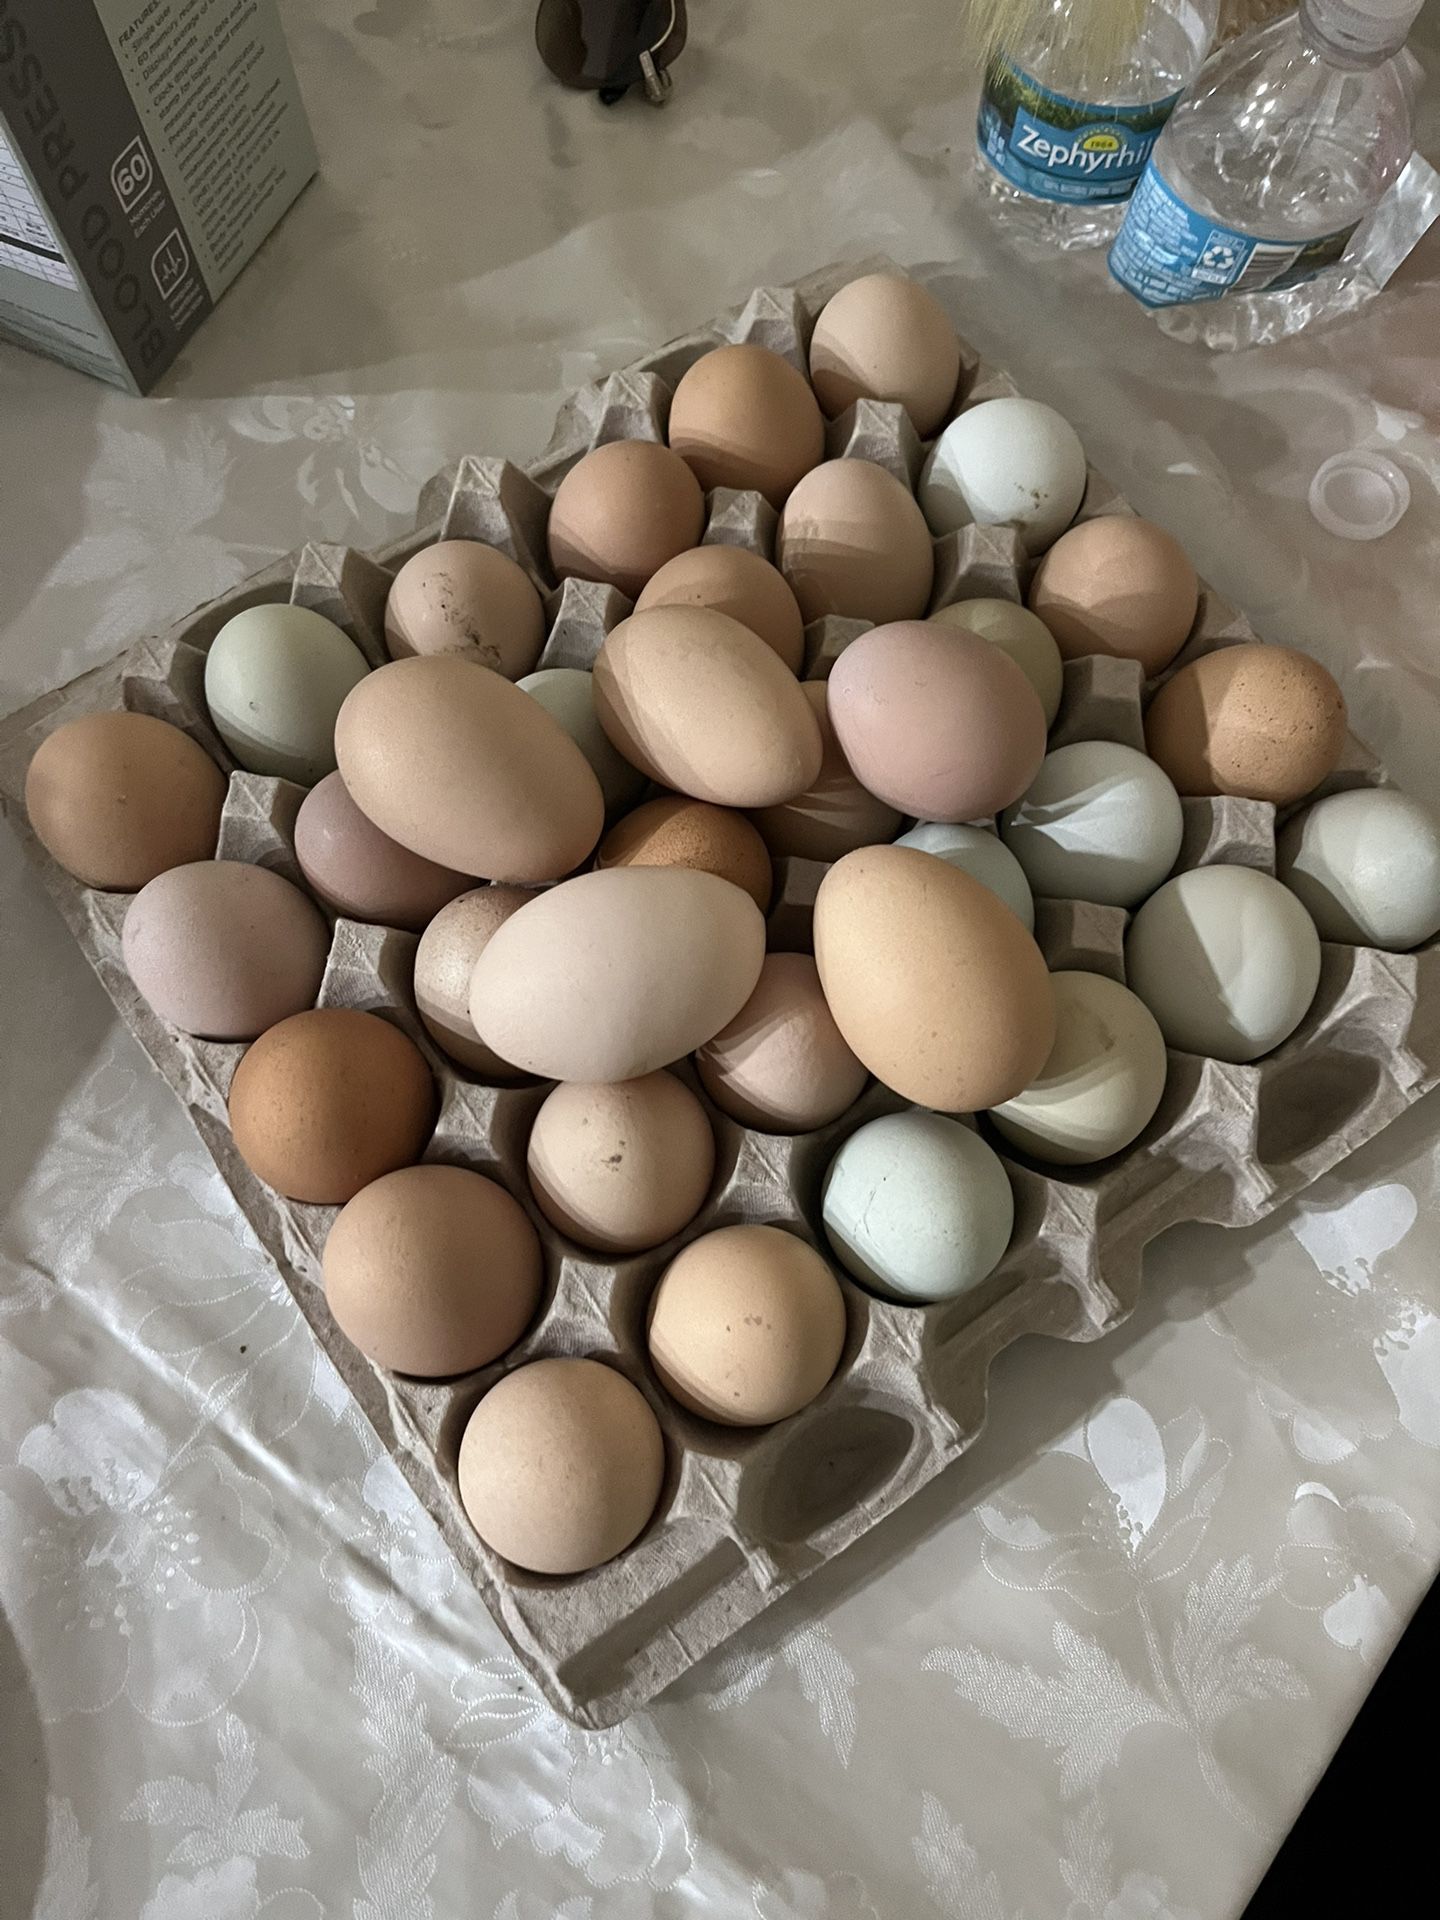 eggs for sale 